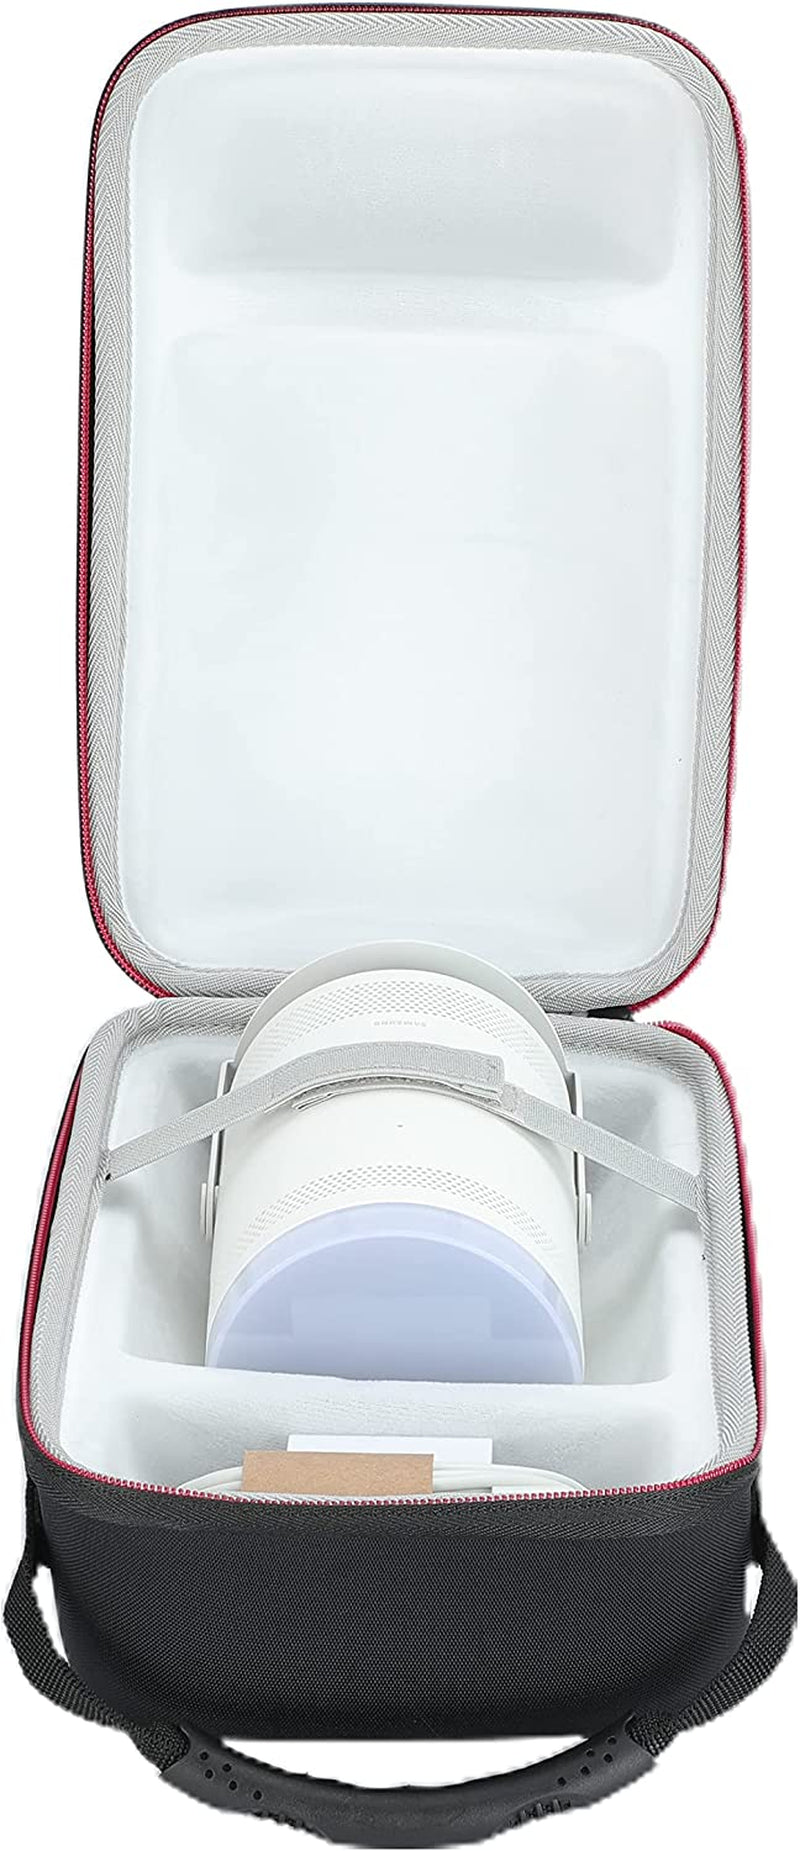 Hard Case for Samsung the Freestyle Projector,Travel Bag for Samsung the Freestyle Projector